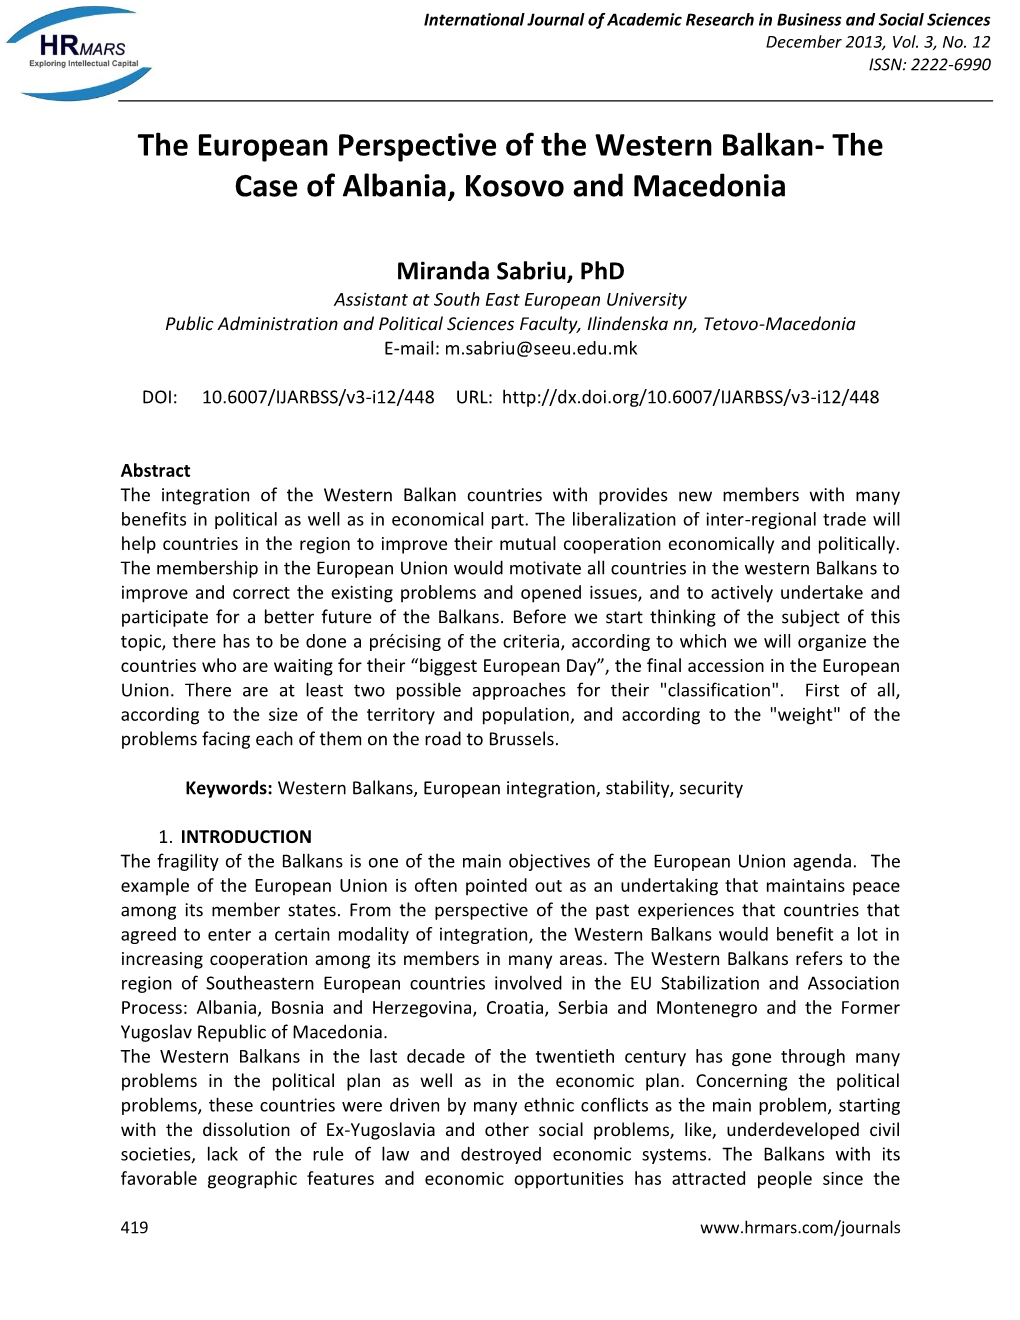 The European Perspective of the Western Balkan- the Case of Albania, Kosovo and Macedonia